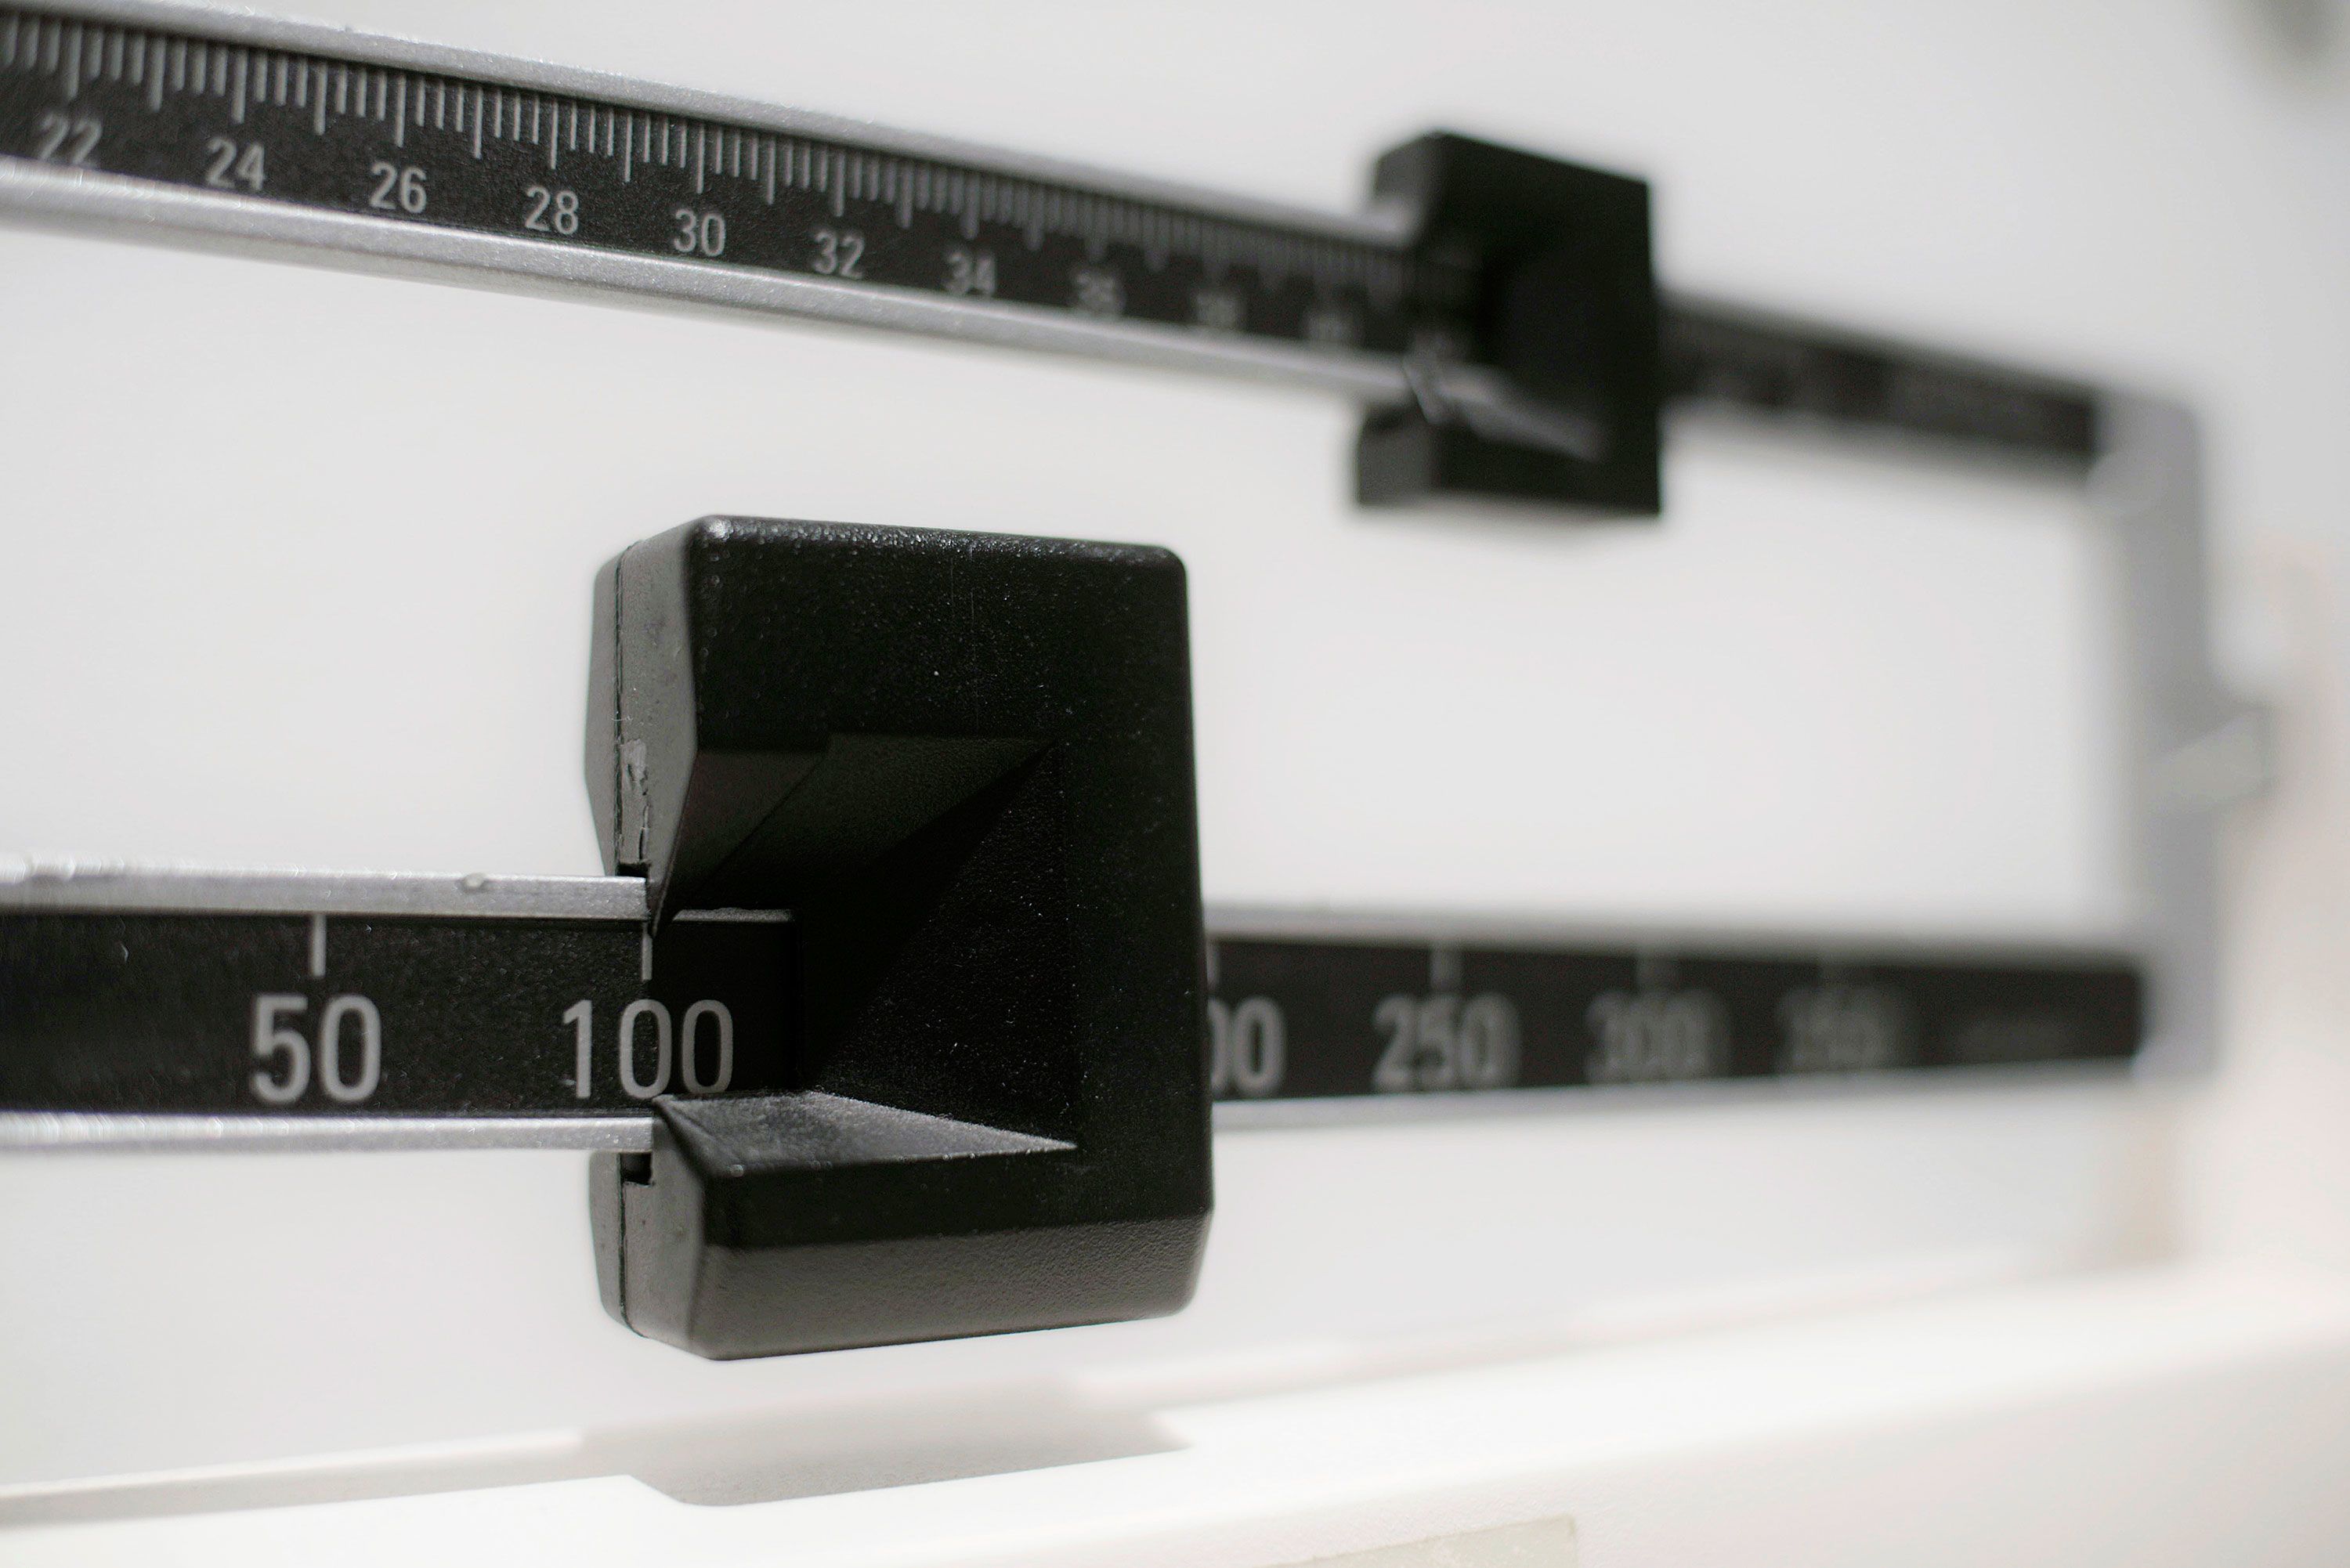 Video: Why Body Mass Index is an outdated fitness measure